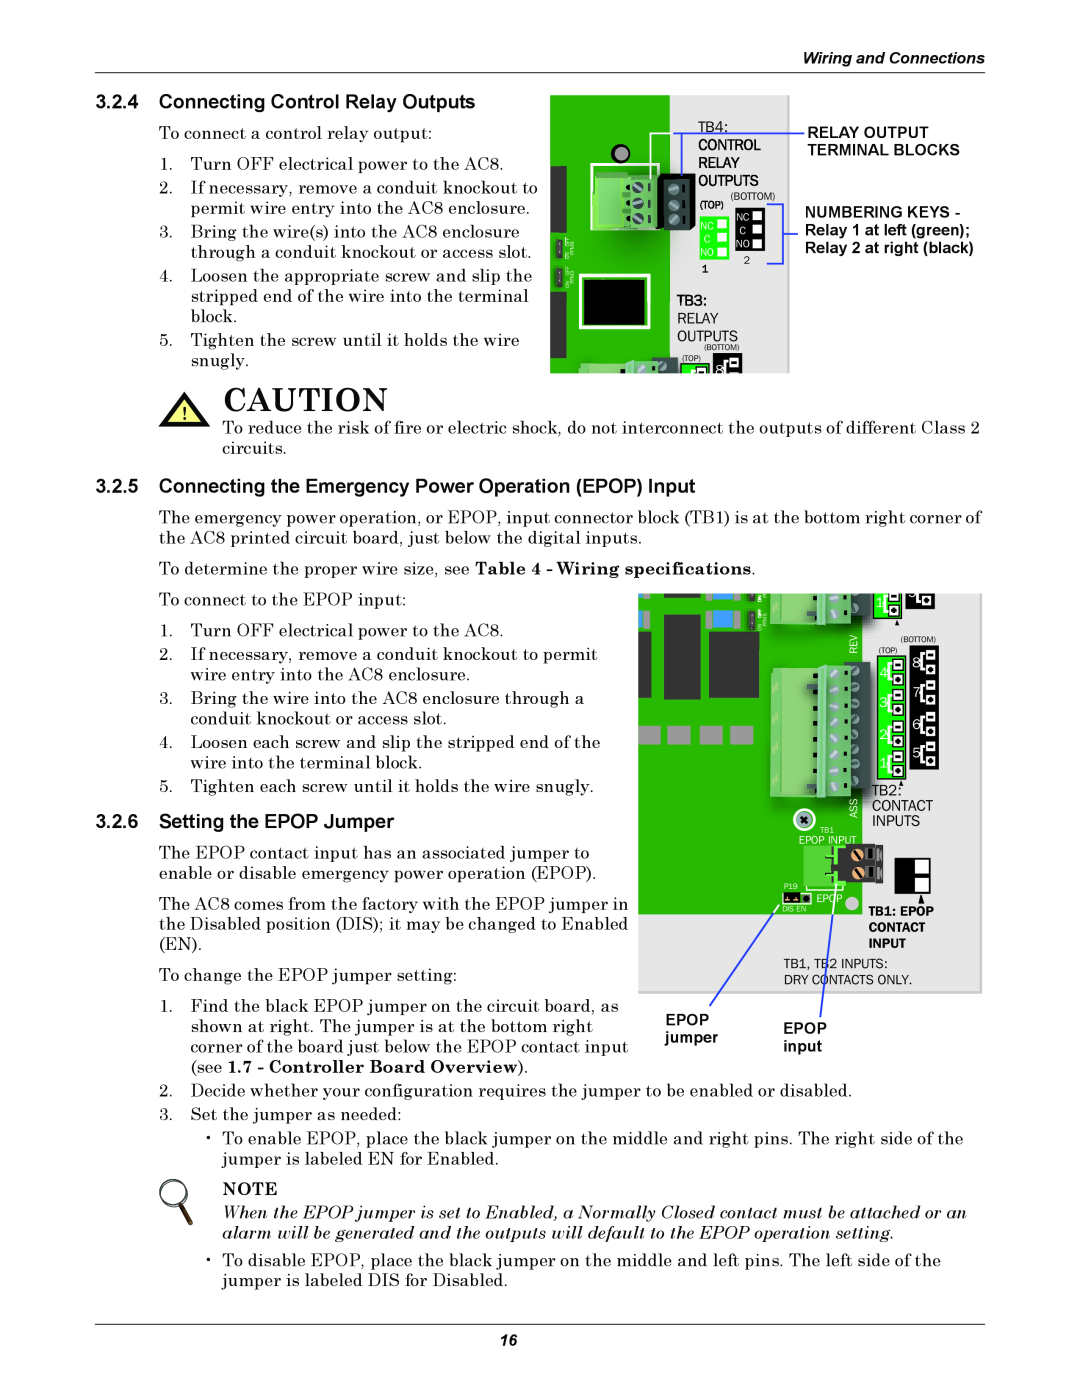 Emerson AC8 user manual 3.2.4Connecting Control Relay Outputs, 3.2.6Setting the EPOP Jumper 